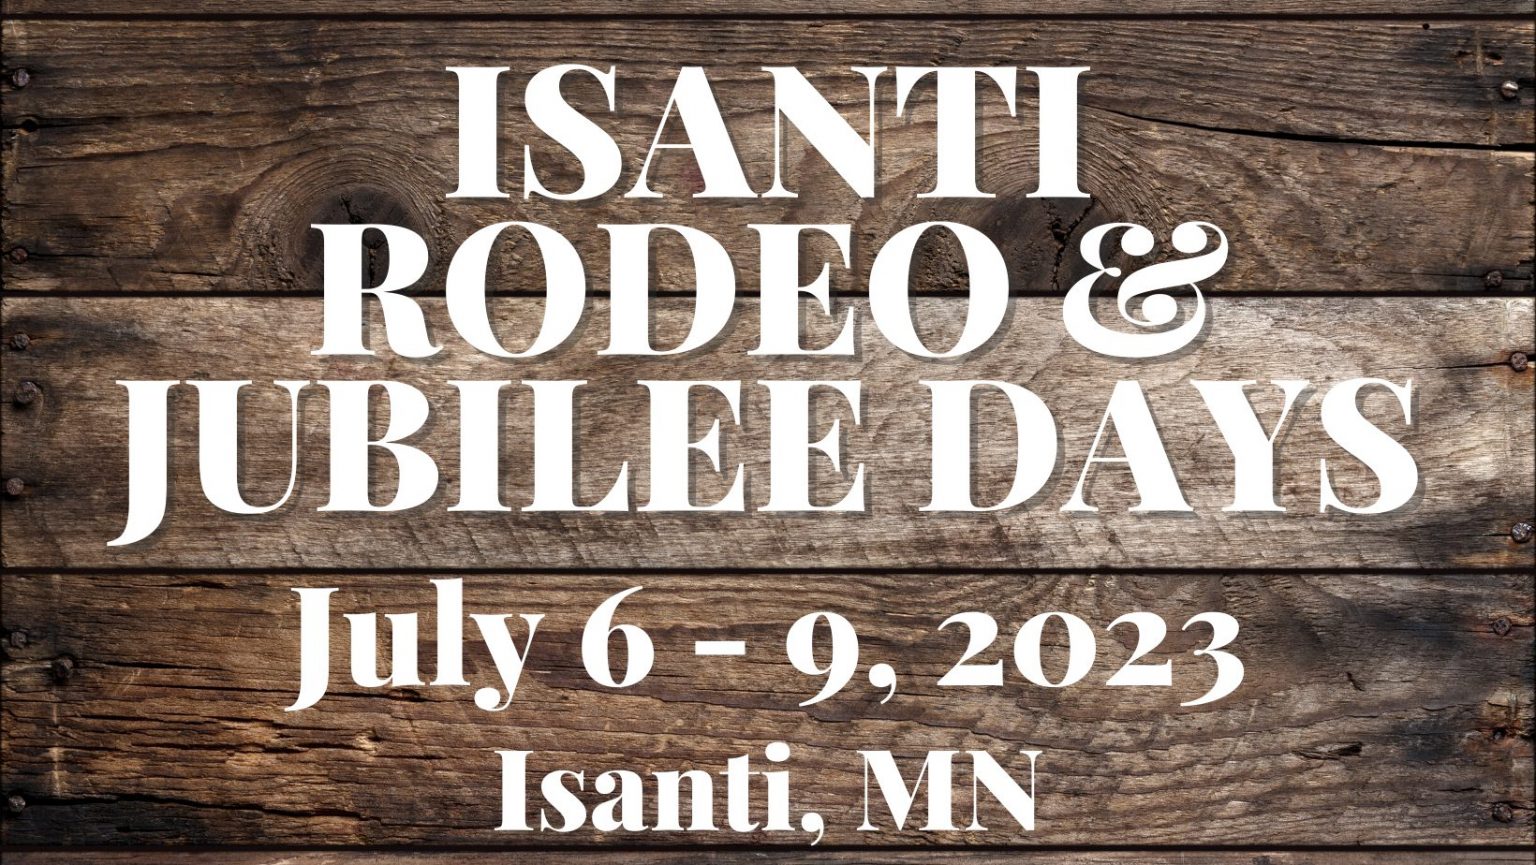 Isanti Rodeo & Jubilee Days North 65 Chamber of Commerce